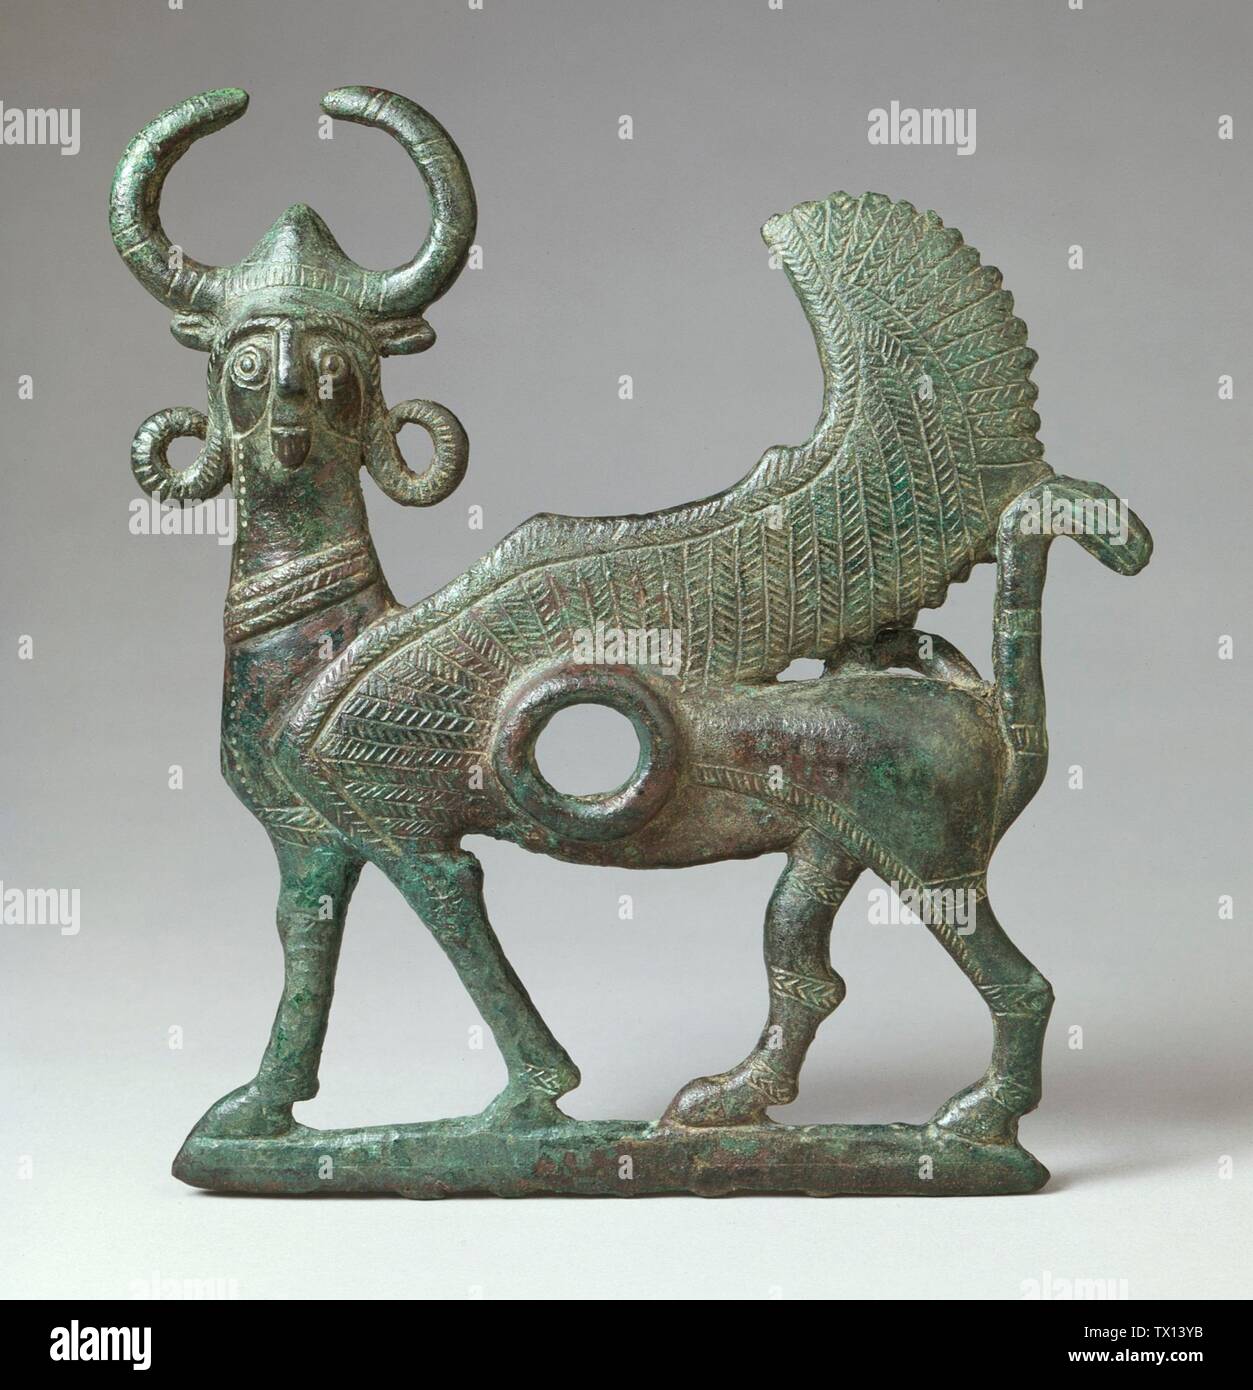 Cheek Piece from a Horse Bit; Iran, Bronze du Luristan, circa 1000-800 B.C. Tools and Equipment; horse trappings Bronze 7 1/4 x 6 1/2 in. (18.5 x 16.7 cm) The Nasli M. Heeramaneck Collection of Ancient Near Eastern and Central Asian Art, gift of The Ahmanson Foundation (M.76.97.99) Art of the Ancient Near East Currently on public view: Hammer Building, floor 3; between circa 1000 and circa 800 B.C.; Stock Photo